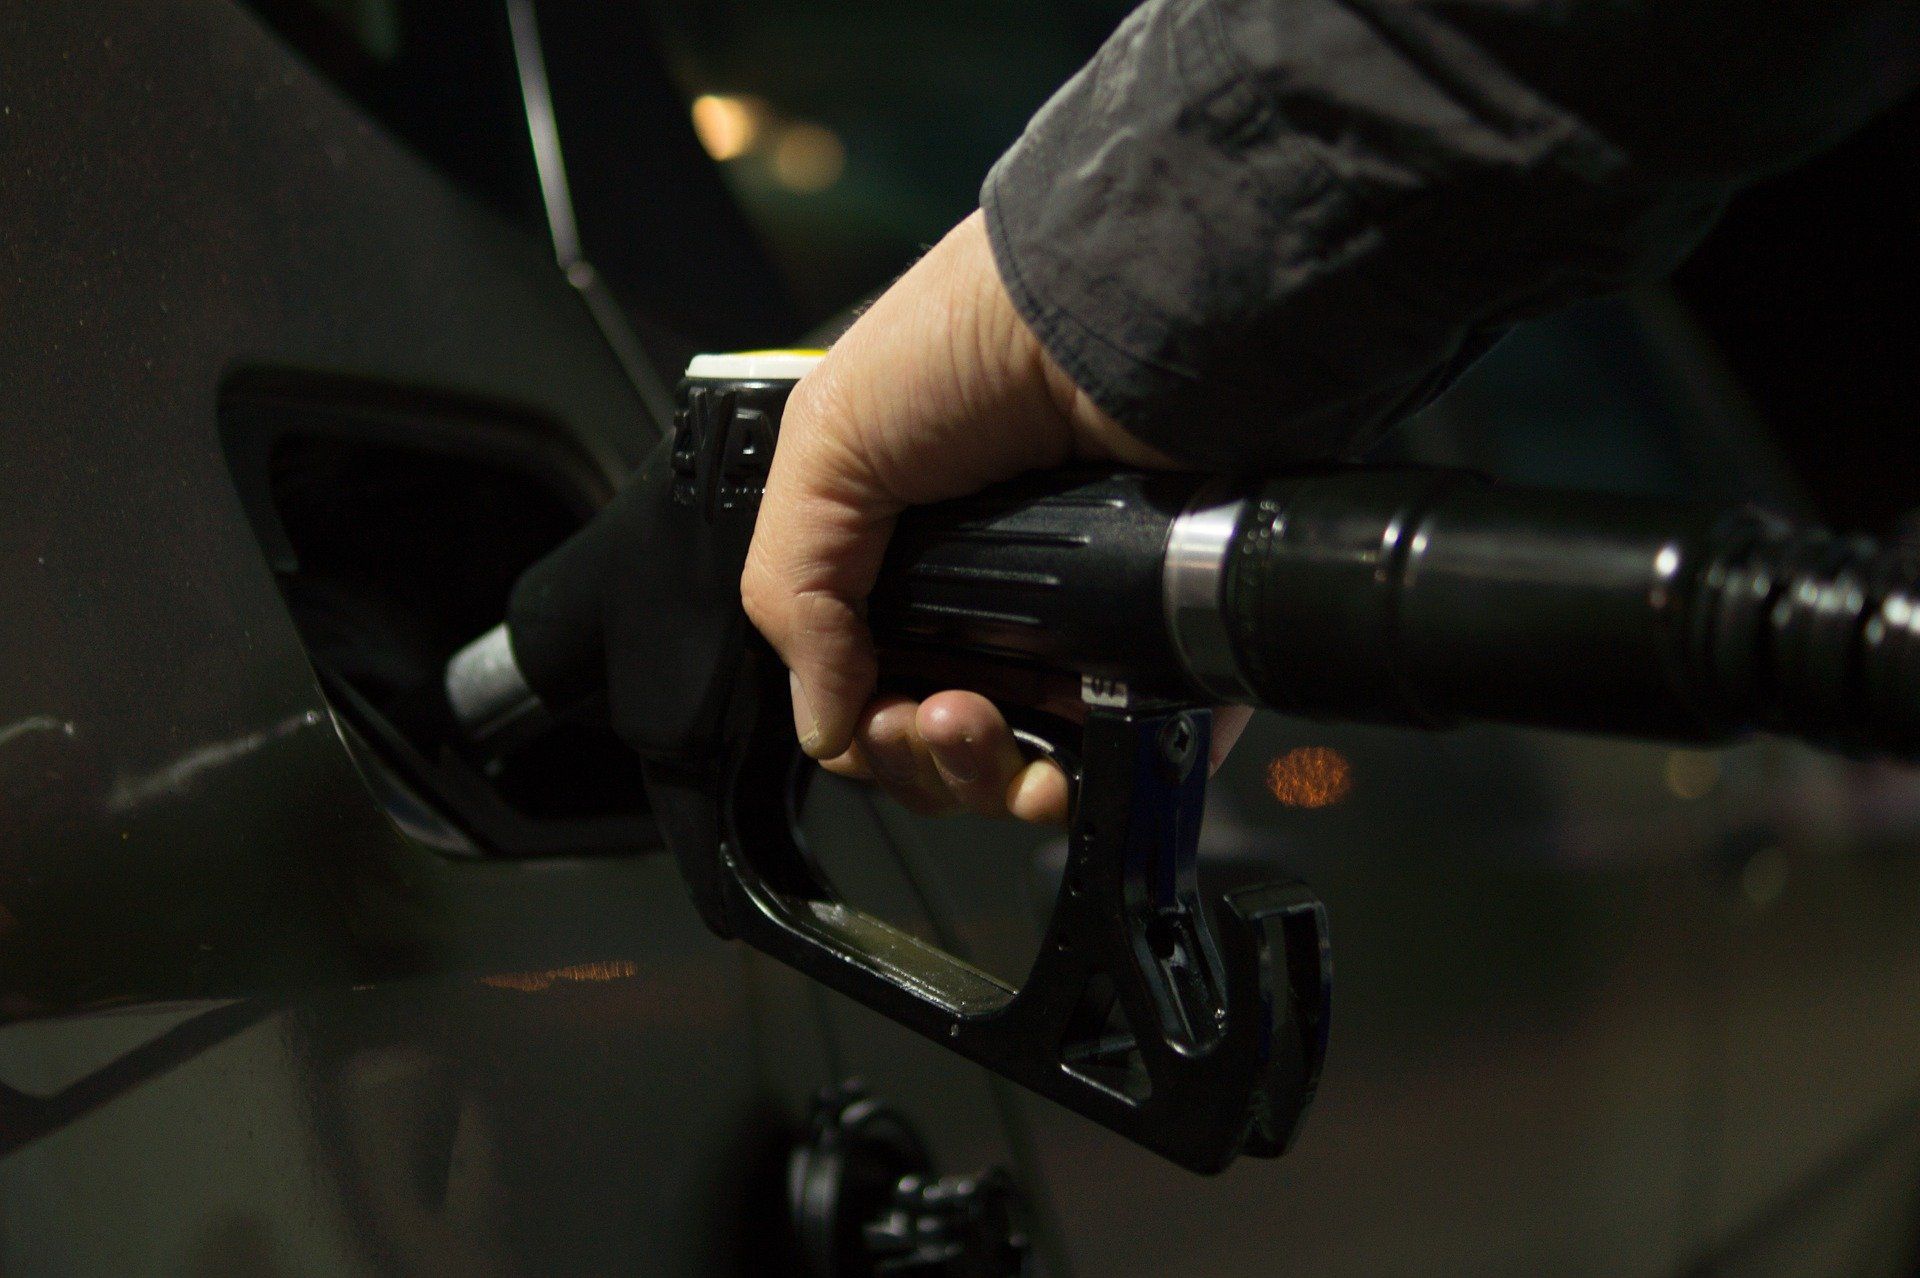 Fuel price today: Petrol and Diesel rates remain unchanged on May 2, 2022